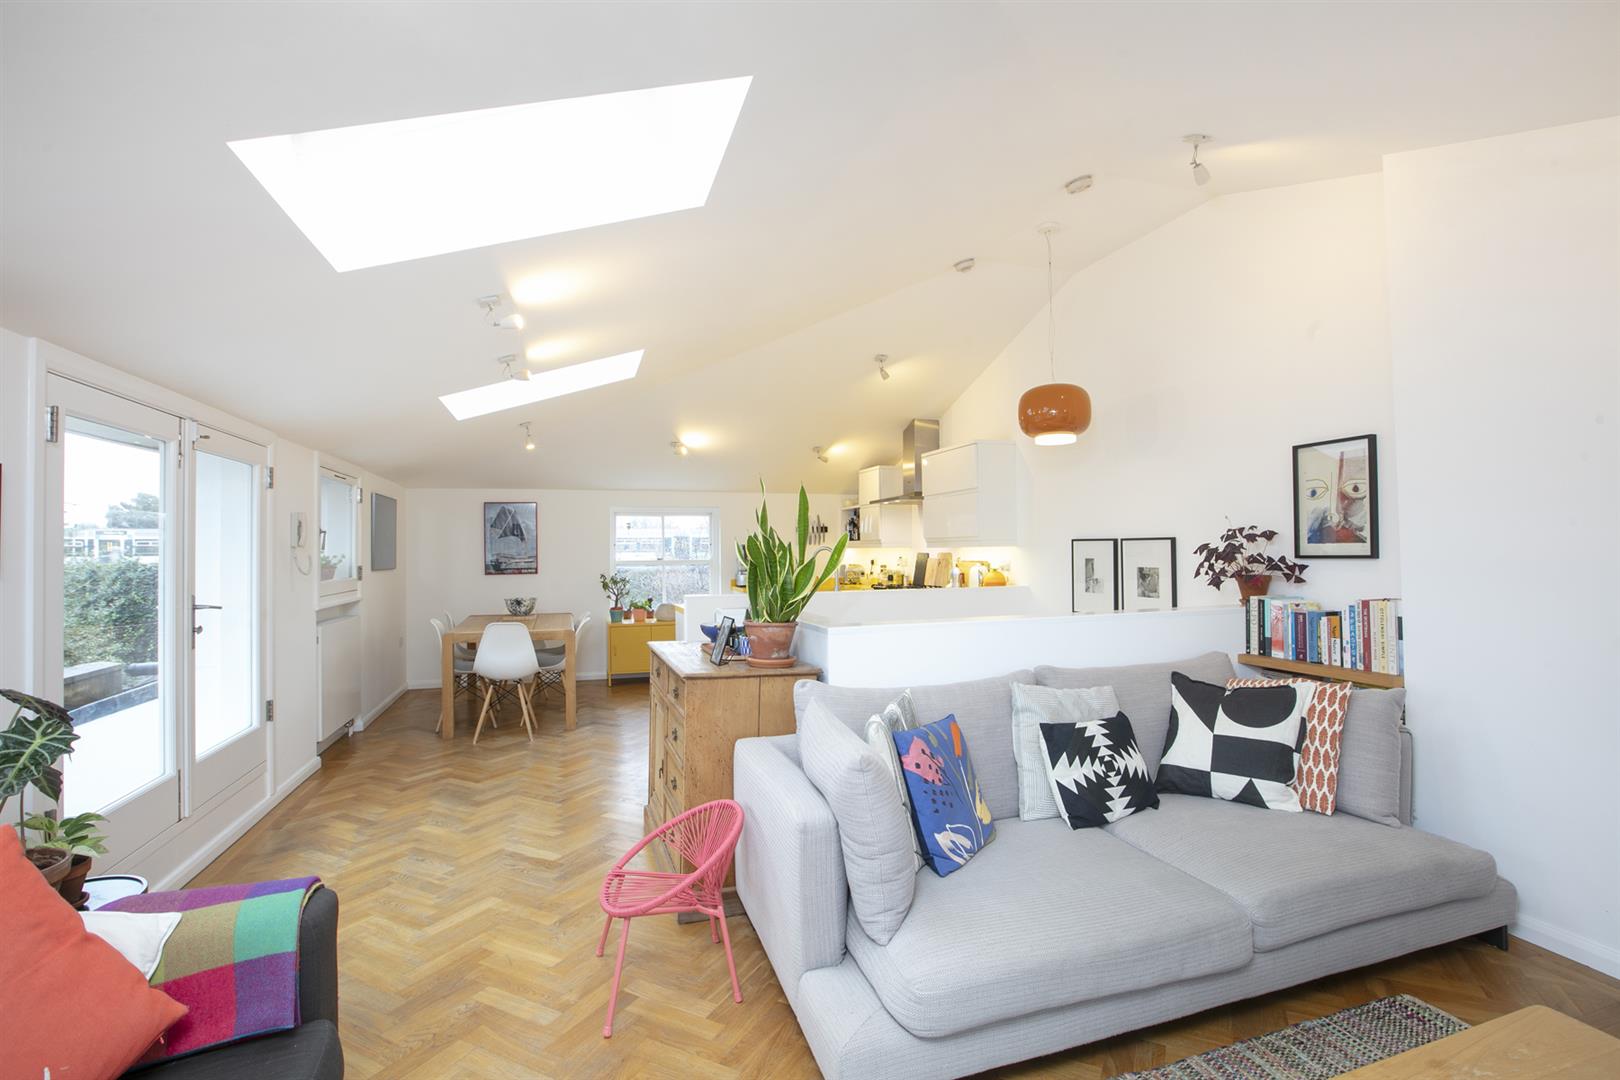 Flat - Conversion For Sale in Holly Grove, Peckham, SE15 893 view3